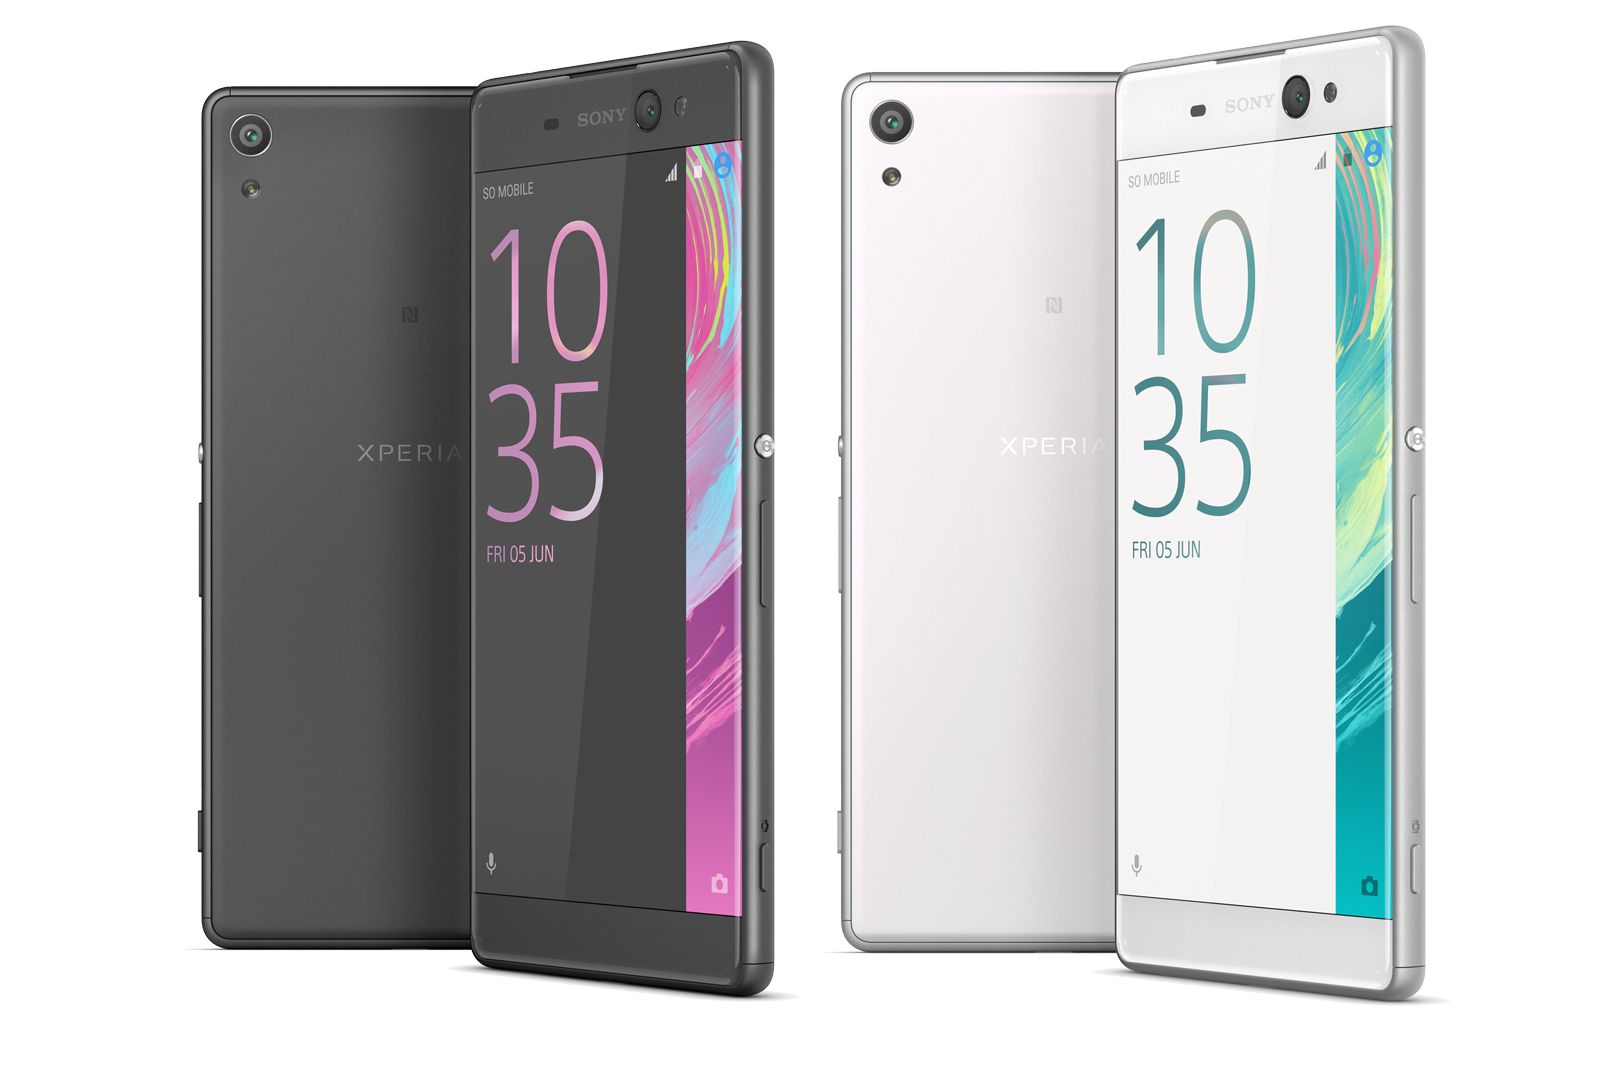 sony xperia xa ultra wants to be the ultimate selfie phone image 1